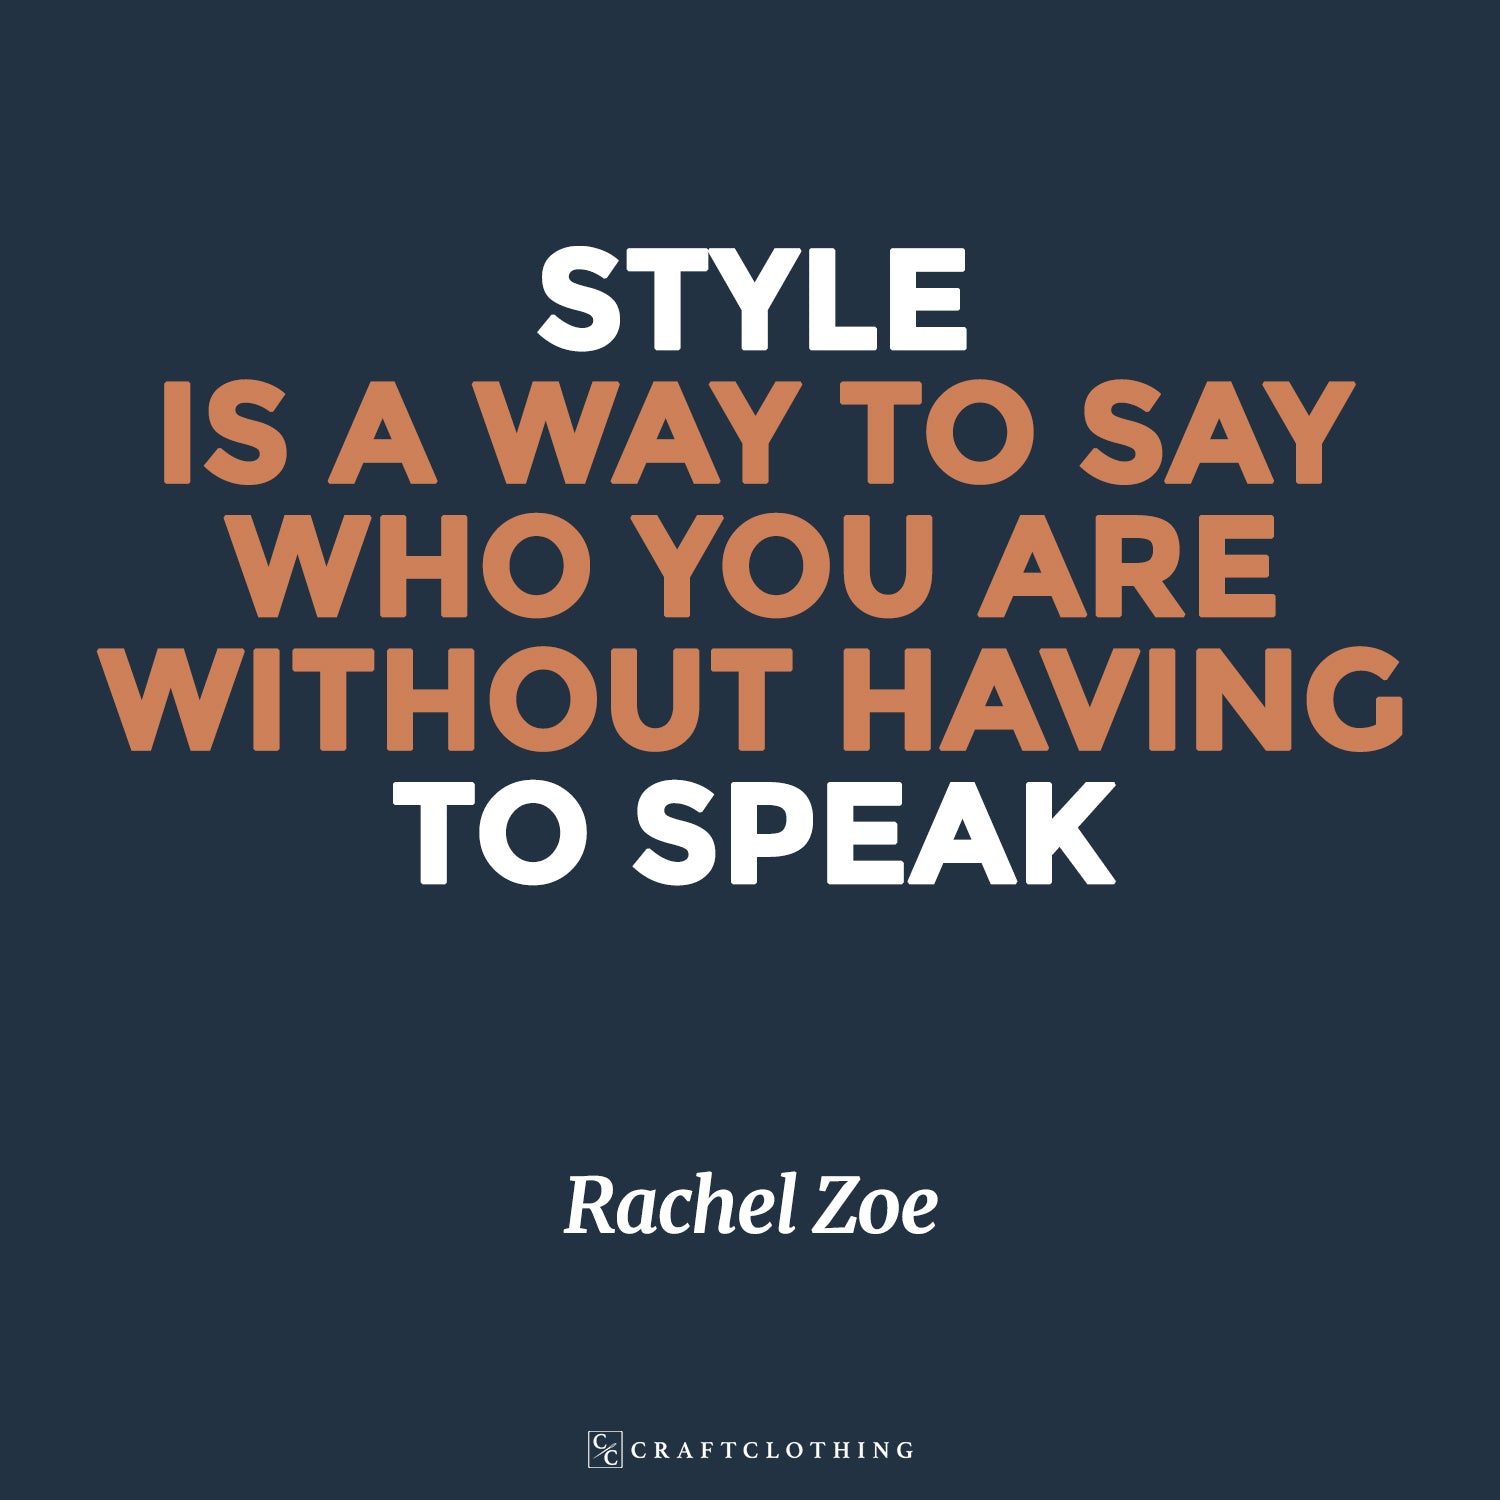 STYLE IS A WAY TO SAY WHO YOU ARE WITHOUT HAVING TO SPEAK